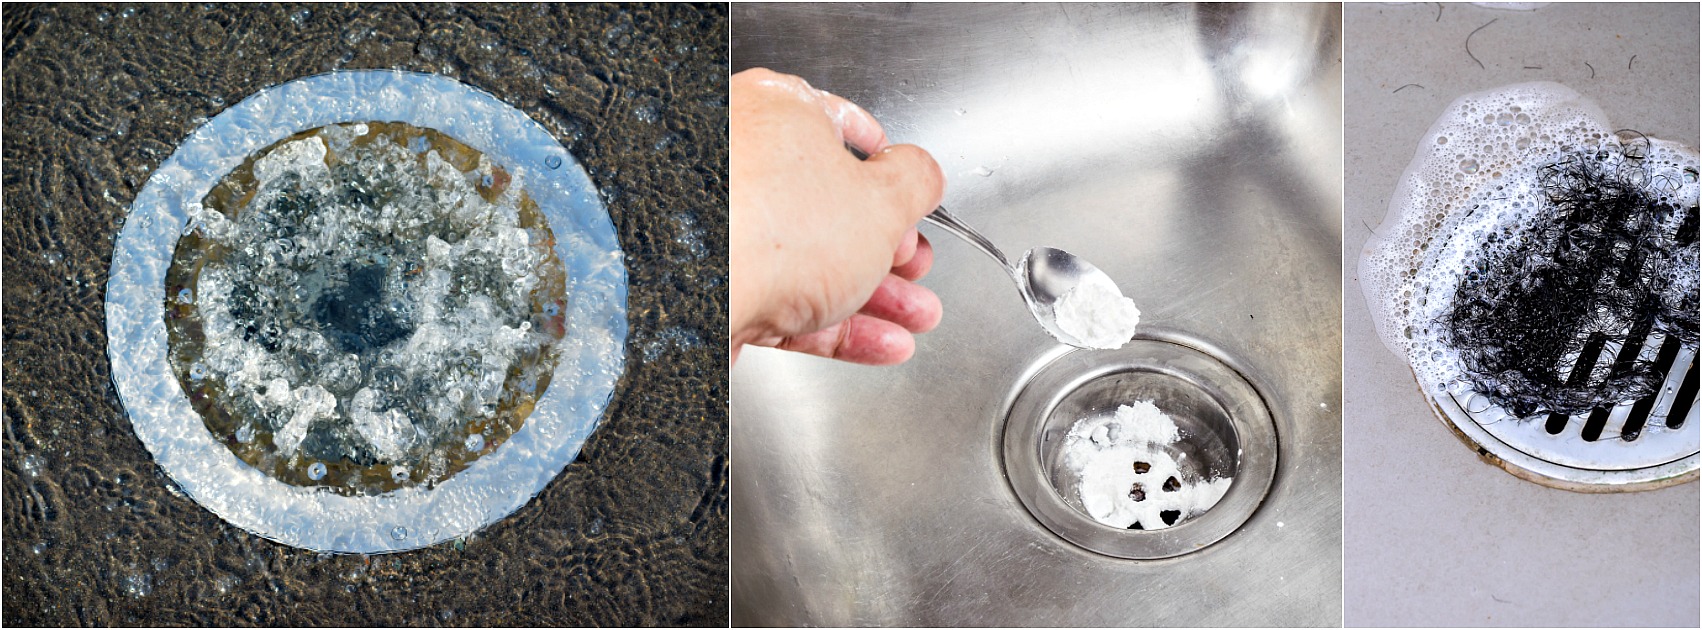 How To Clear Your Clogged Drain With Common Household Items